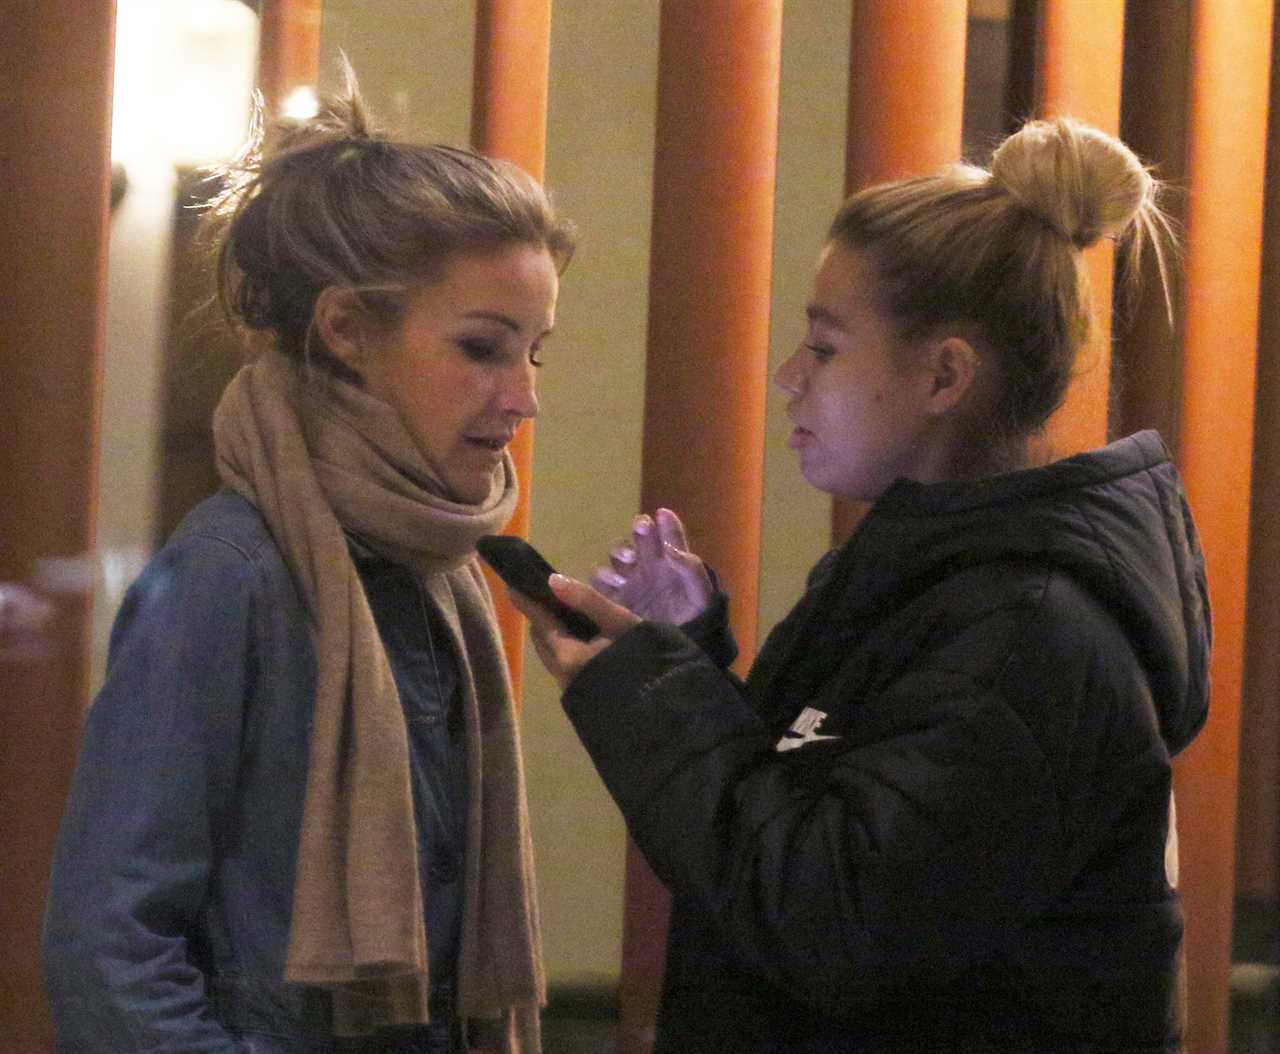 Strictly’s Helen Skelton and Molly Rainford pictured looking emotional as they have deep chat after filming results show